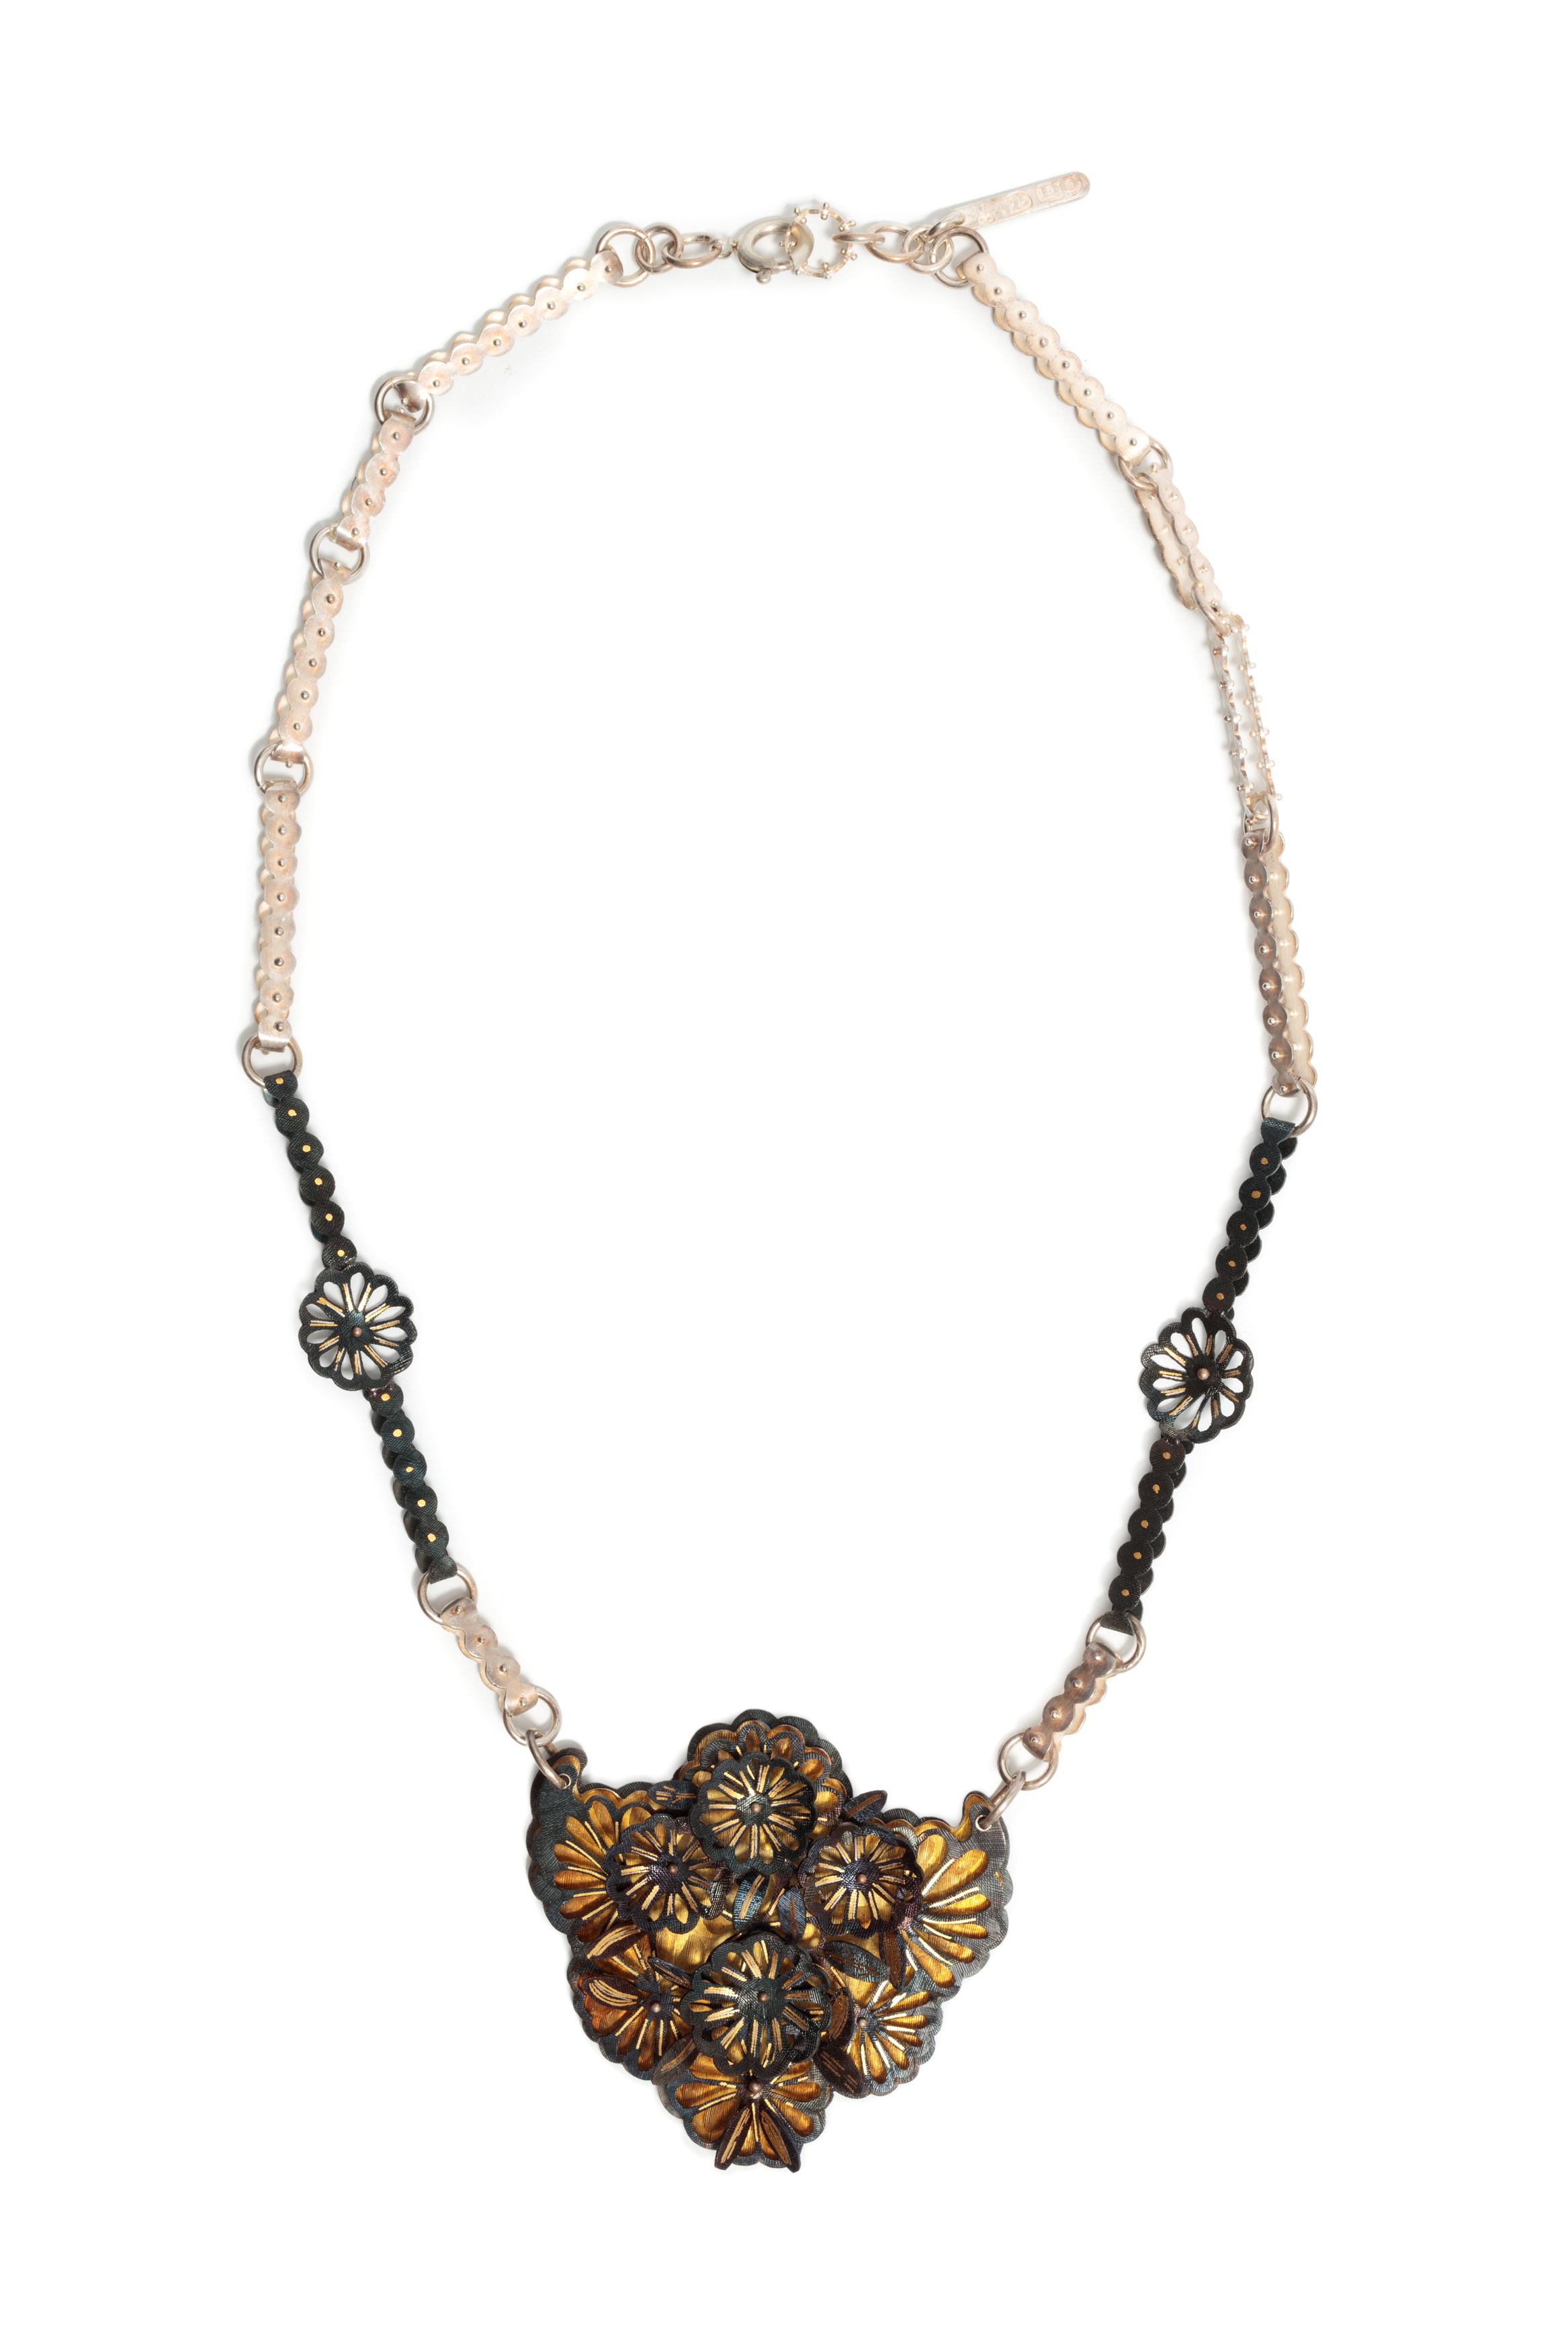 'Blossom' necklace by Joungmee Do